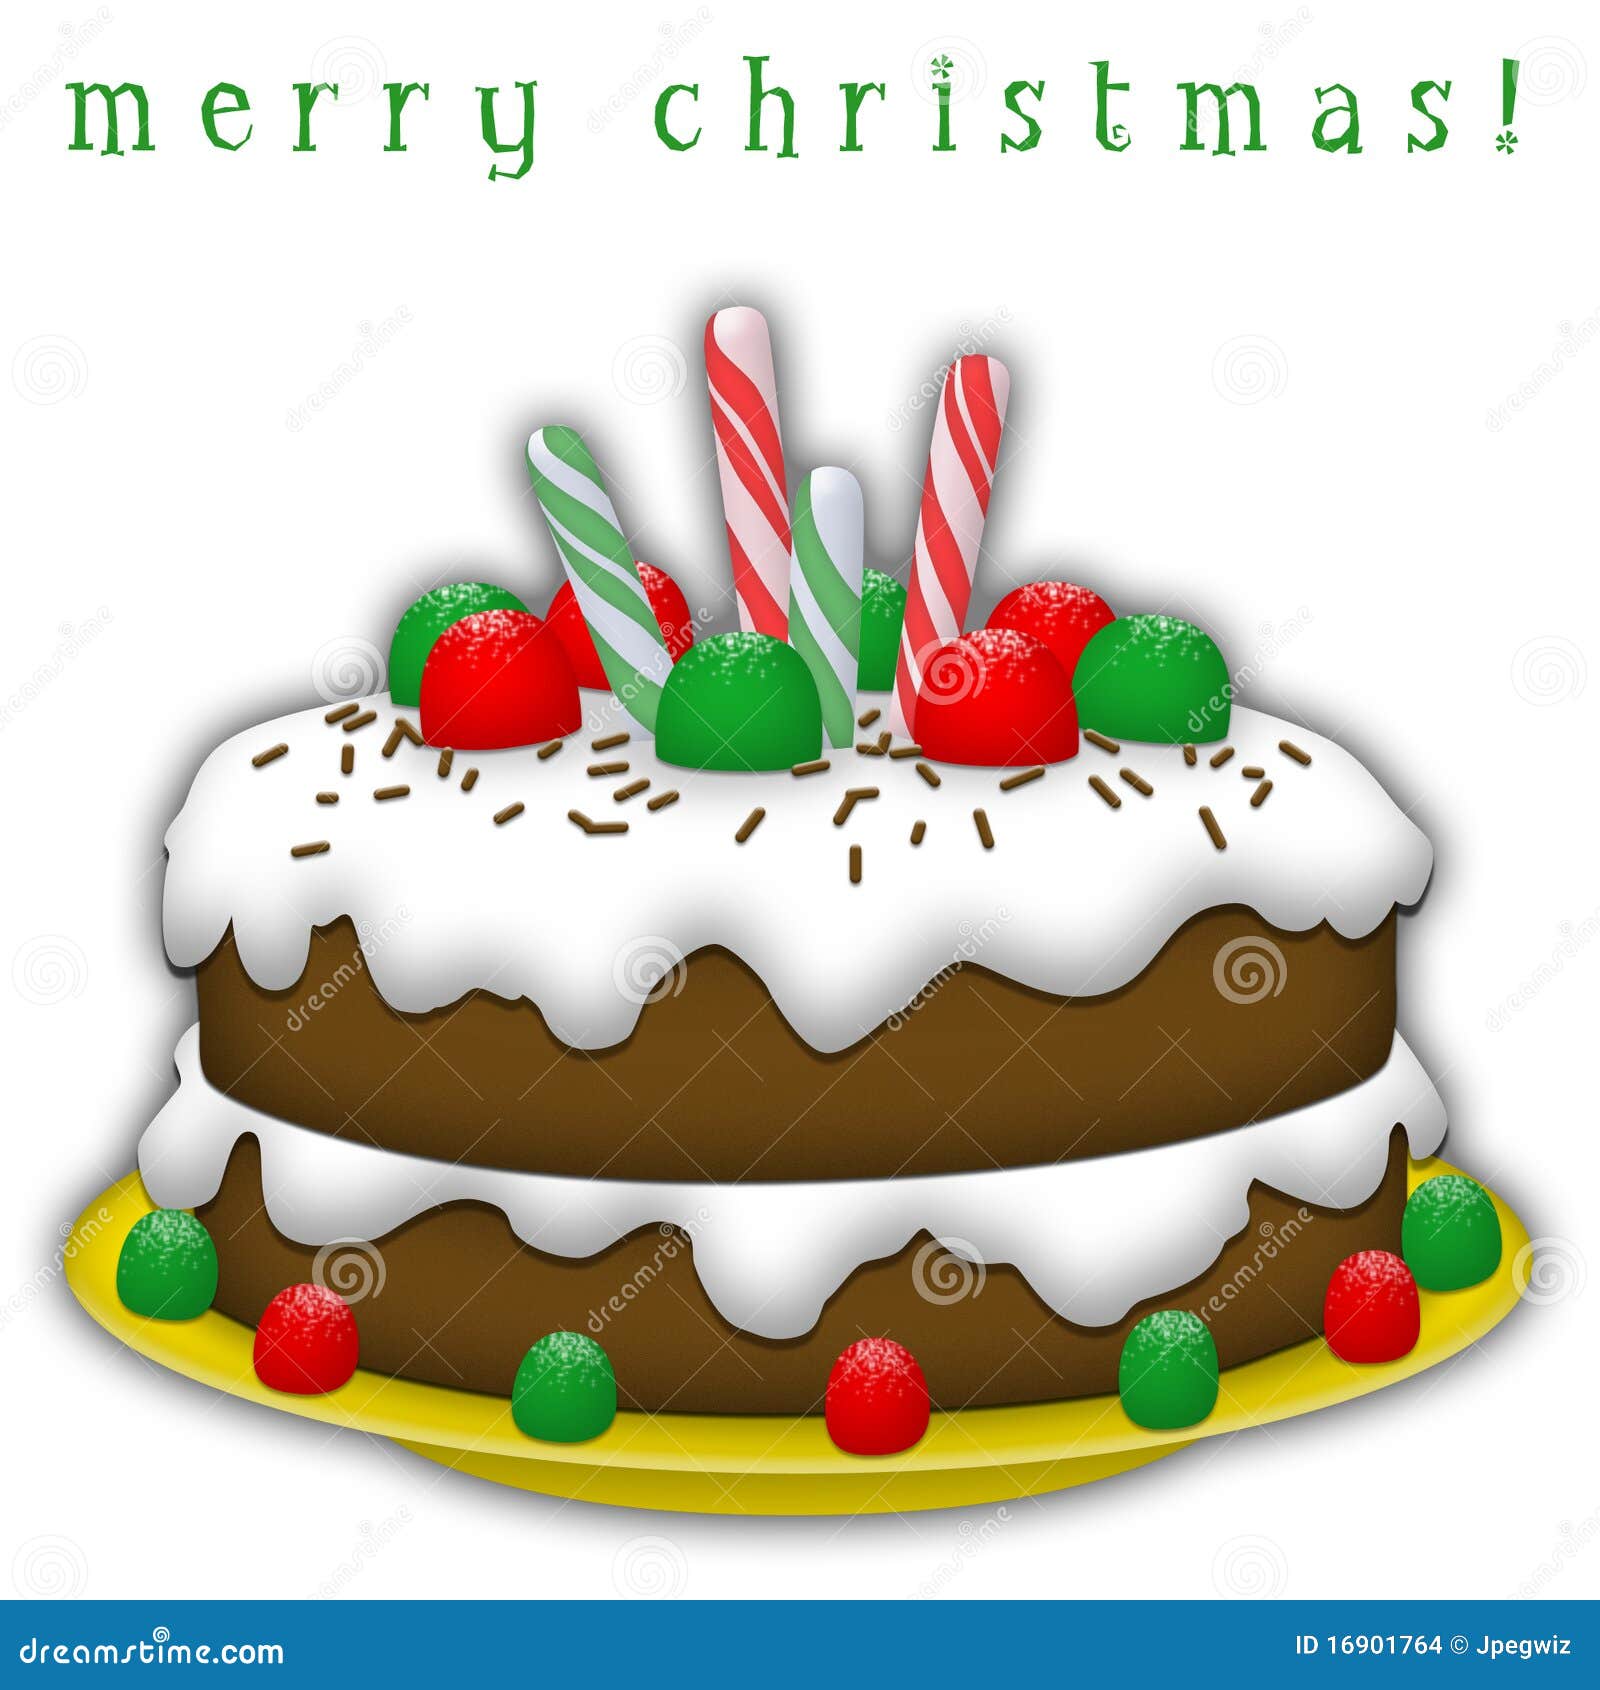 clipart christmas cakes free - photo #13